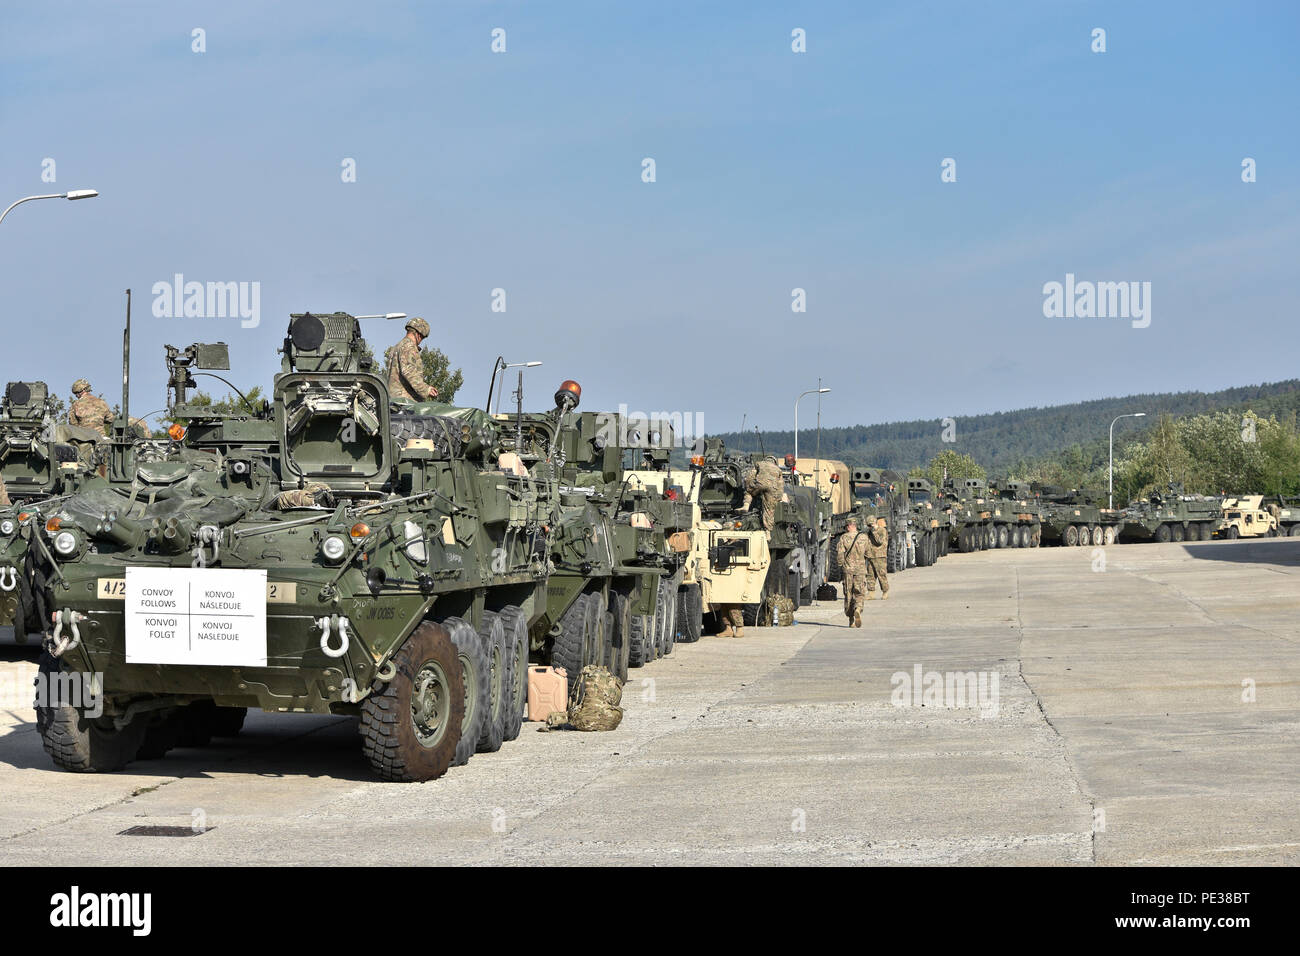 Troopers assigned to 4th Squadron, 2nd Cavalry Regiment, begin to stage their vehicles as the prepare to conduct preventive maintenance, checks and services before driving the second leg of the Dragoon Crossing, a tactical road march starting out at Rose Barracks, Germany and continuing through the Czech Republic and the Slovak Republic ending in Hungary on Sept. 14, 2015. The purpose of the exercise is to reassure NATO Allies of the U.S. intent during Operation Atlantic Resolve while demonstrating interoperability and freedom of movement throughout Eastern Europe. (U.S. Army photo by Sgt. Wil Stock Photo